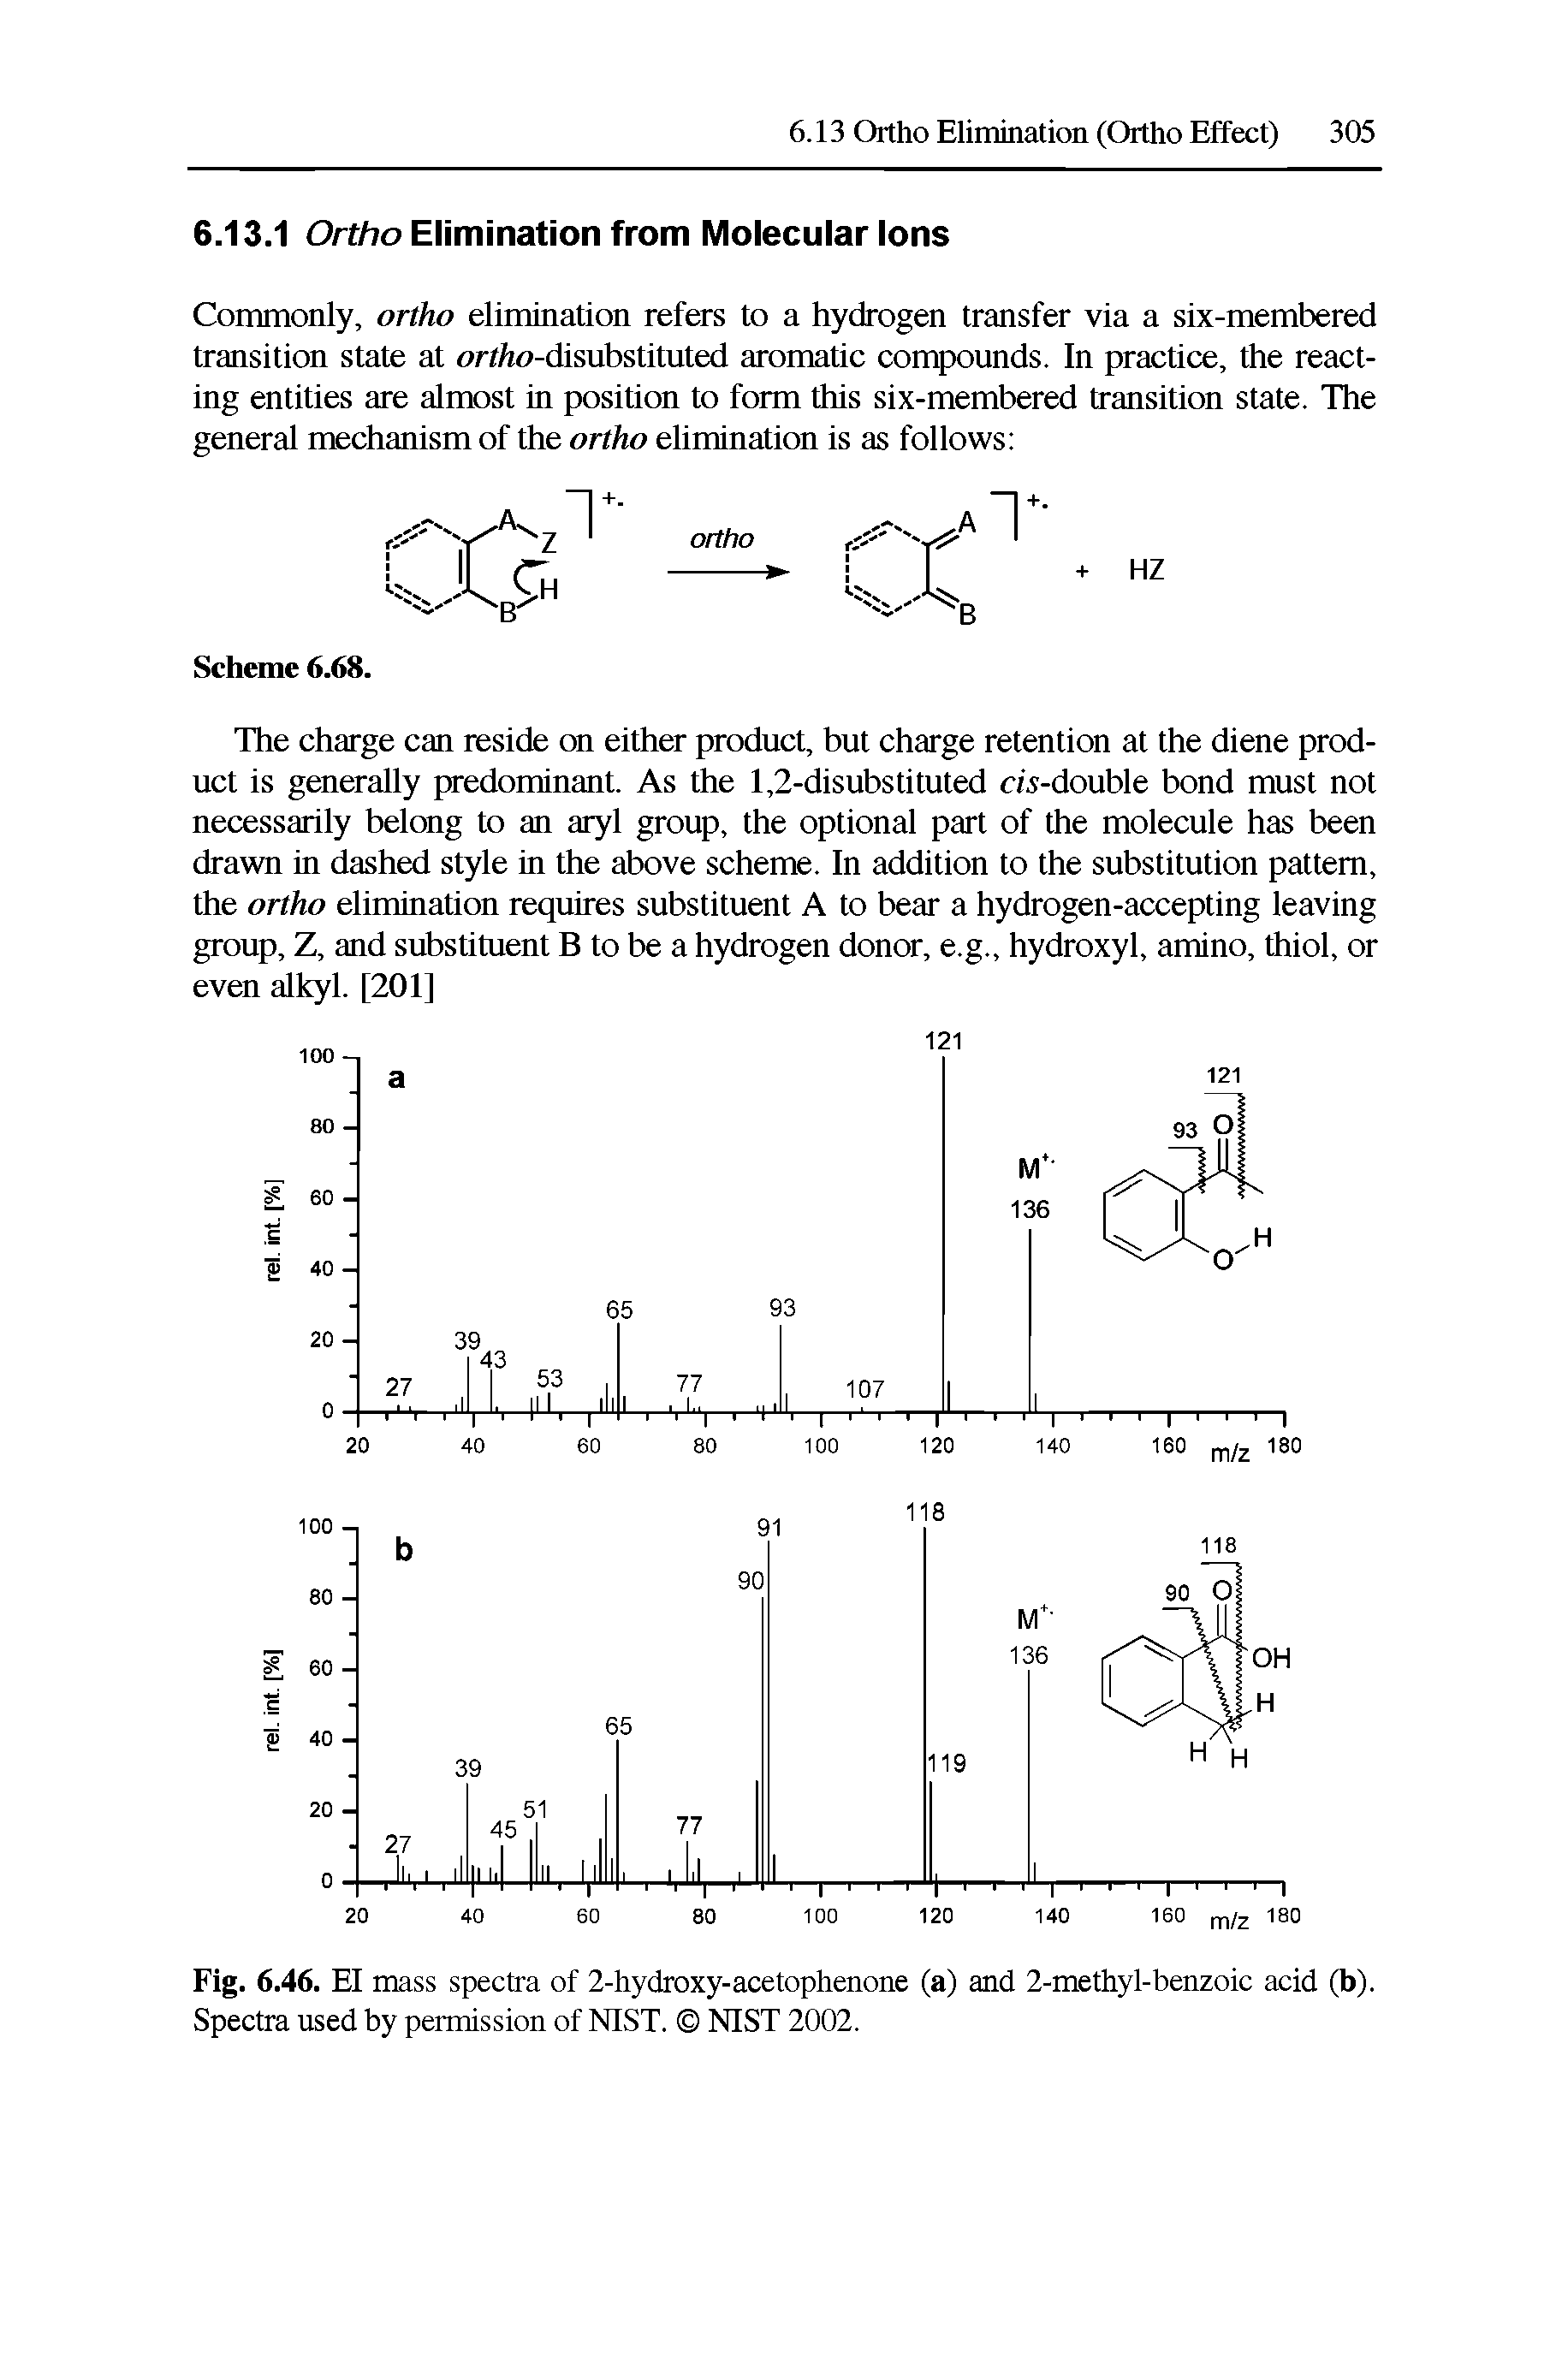 Fig. 6.46. El mass spectra of 2-hydroxy-acetophenone (a) and 2-methyl-benzoic acid (b). Spectra used by permission of NIST. NIST 2002.